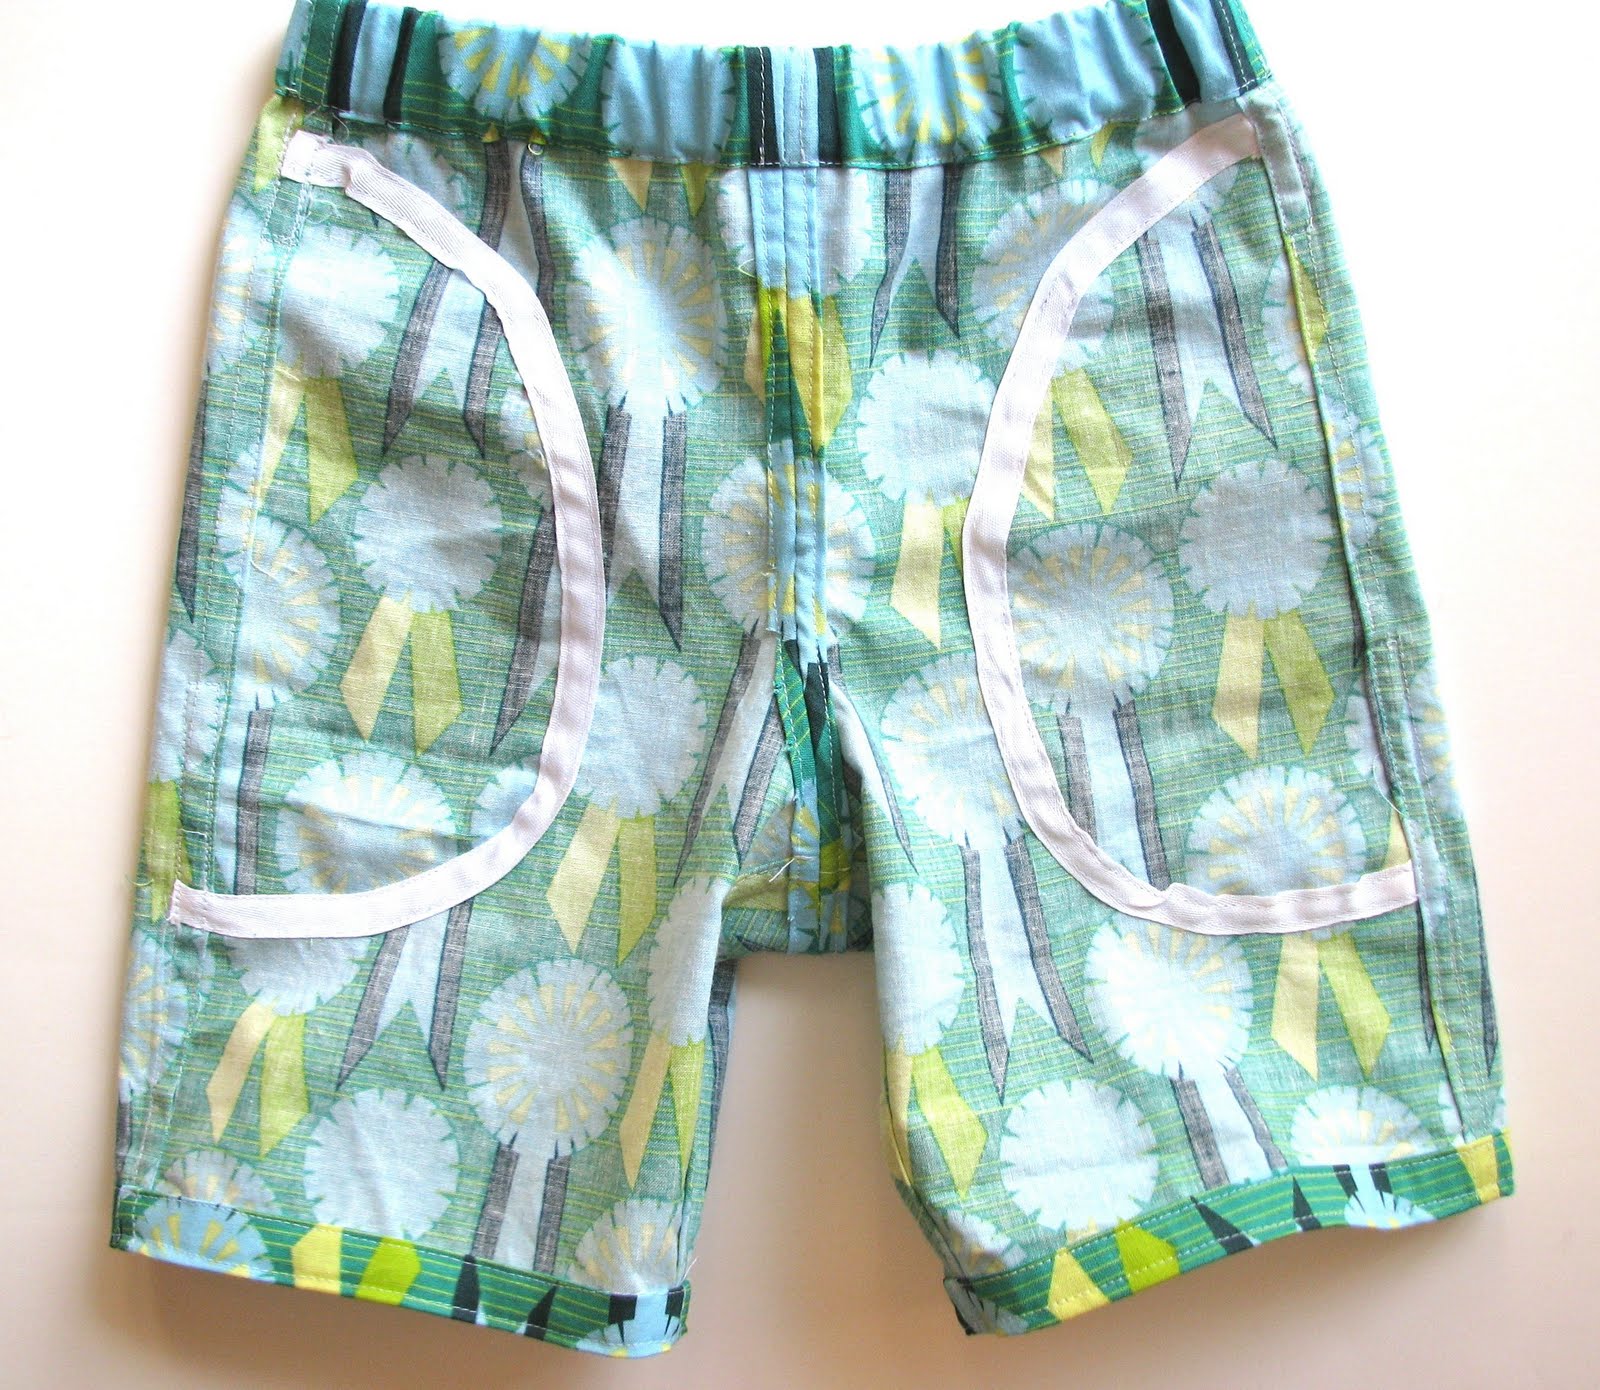 More Board Shorts! - Made By Rae